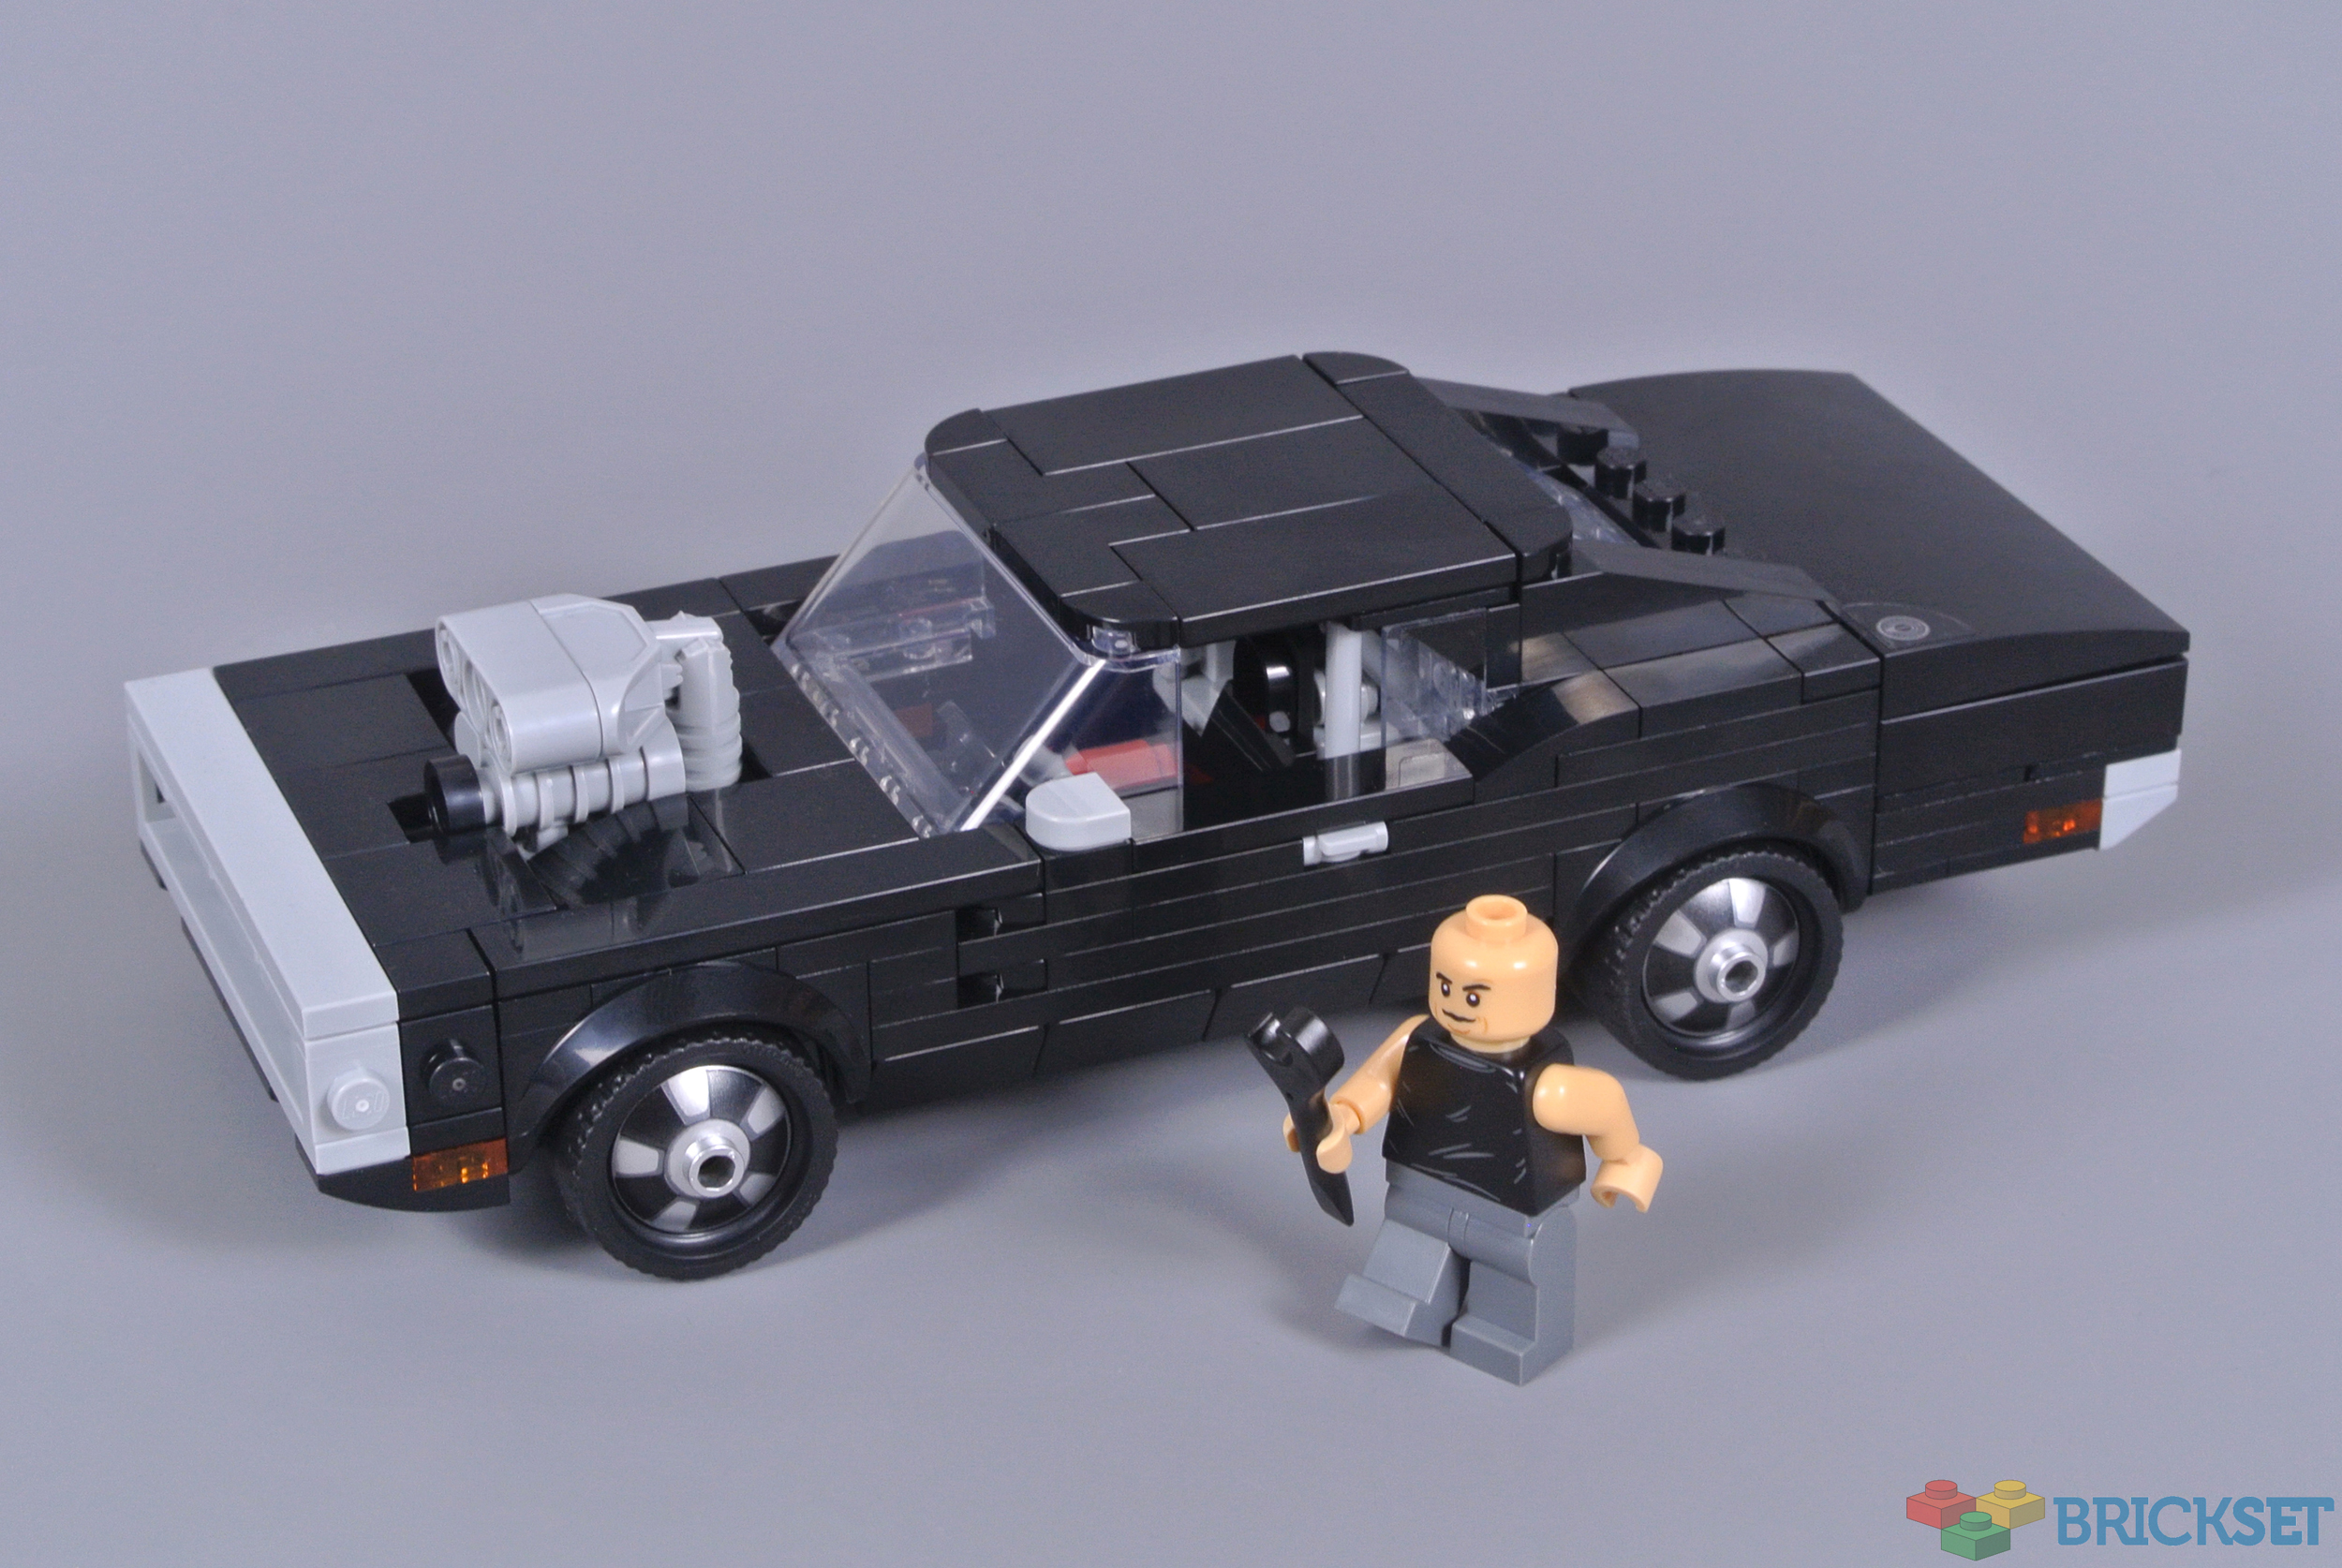 Fast & Furious x LEGO Dom's Dodge Charger 